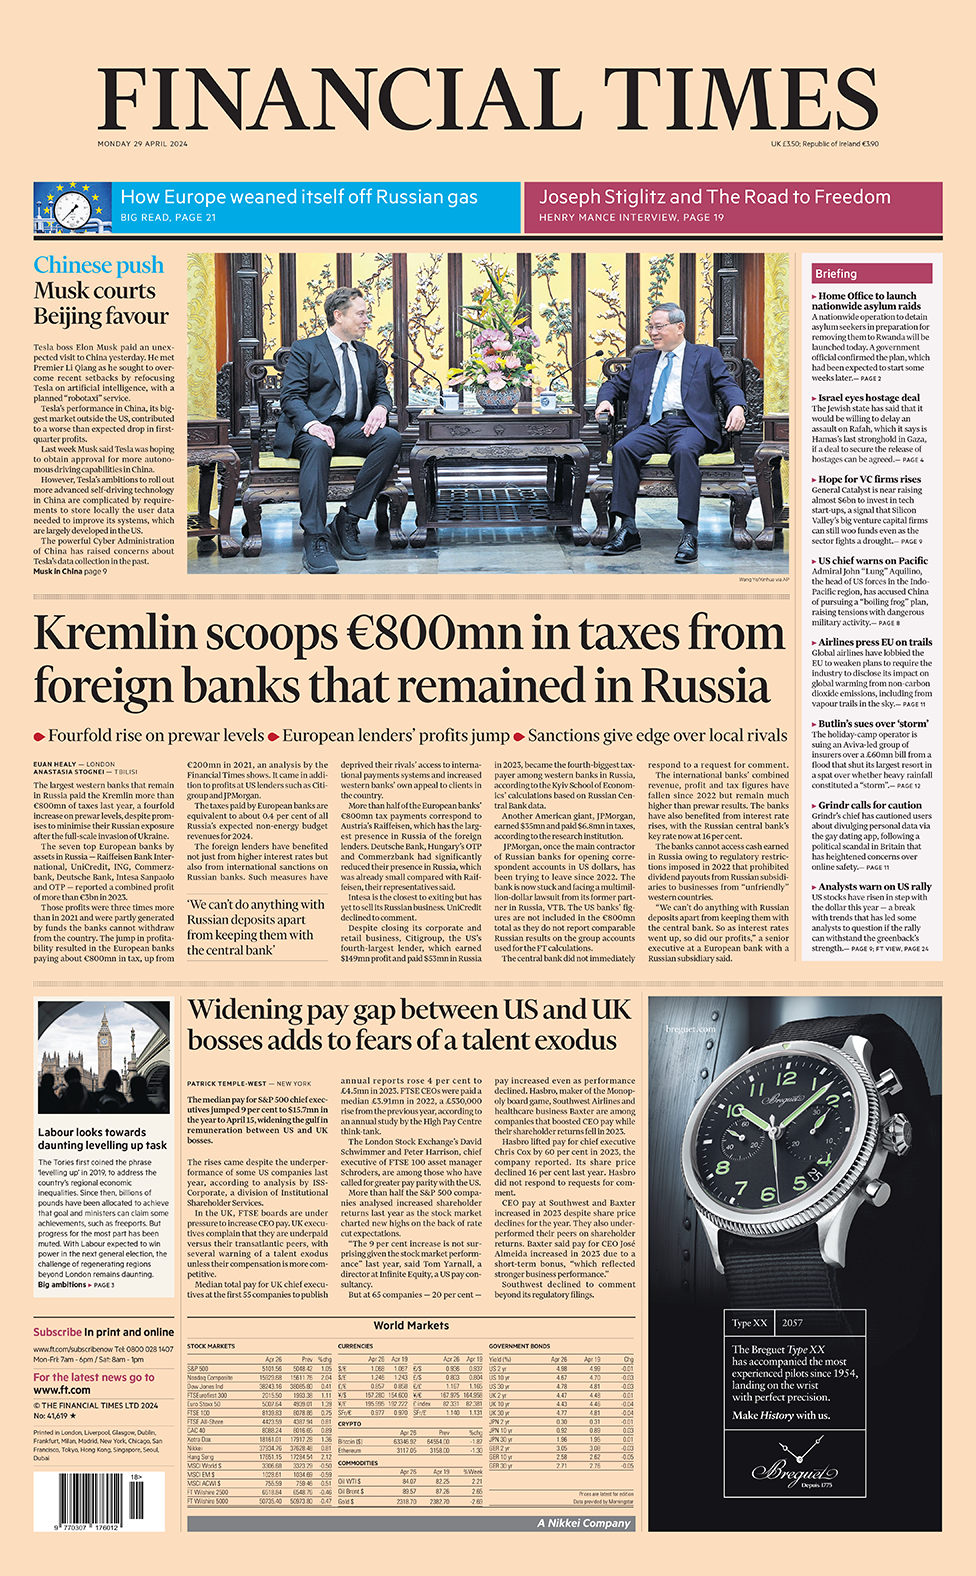 The headline in the Financial Times reads: "Kremlin scoops €800mn in taxes from foreign banks that remained in Russia".